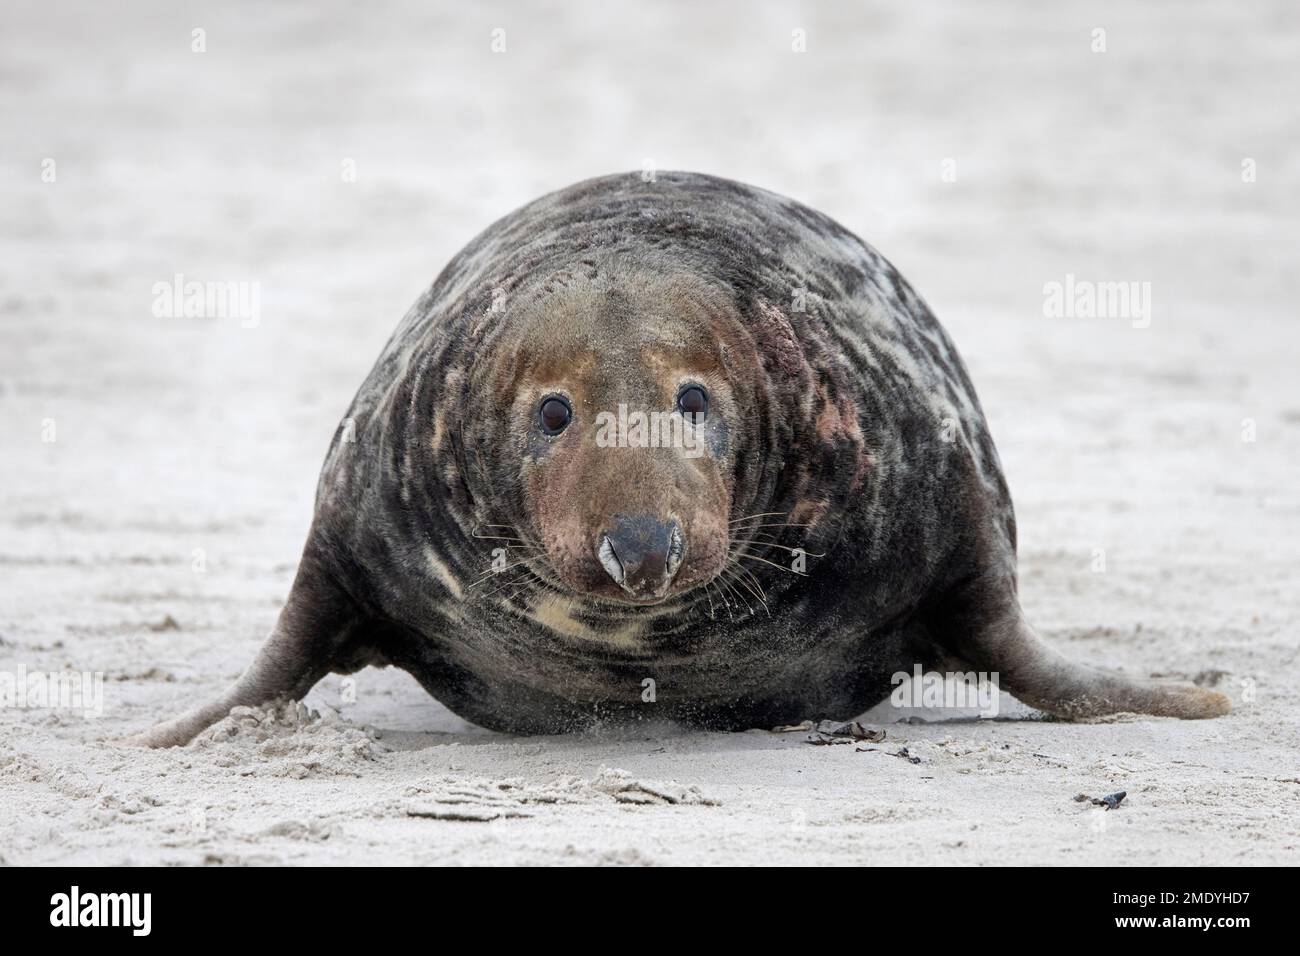 Grey seal / gray seal (Halichoerus grypus) adult male / bull crawling on sandy beach along the North Sea coast in winter Stock Photo